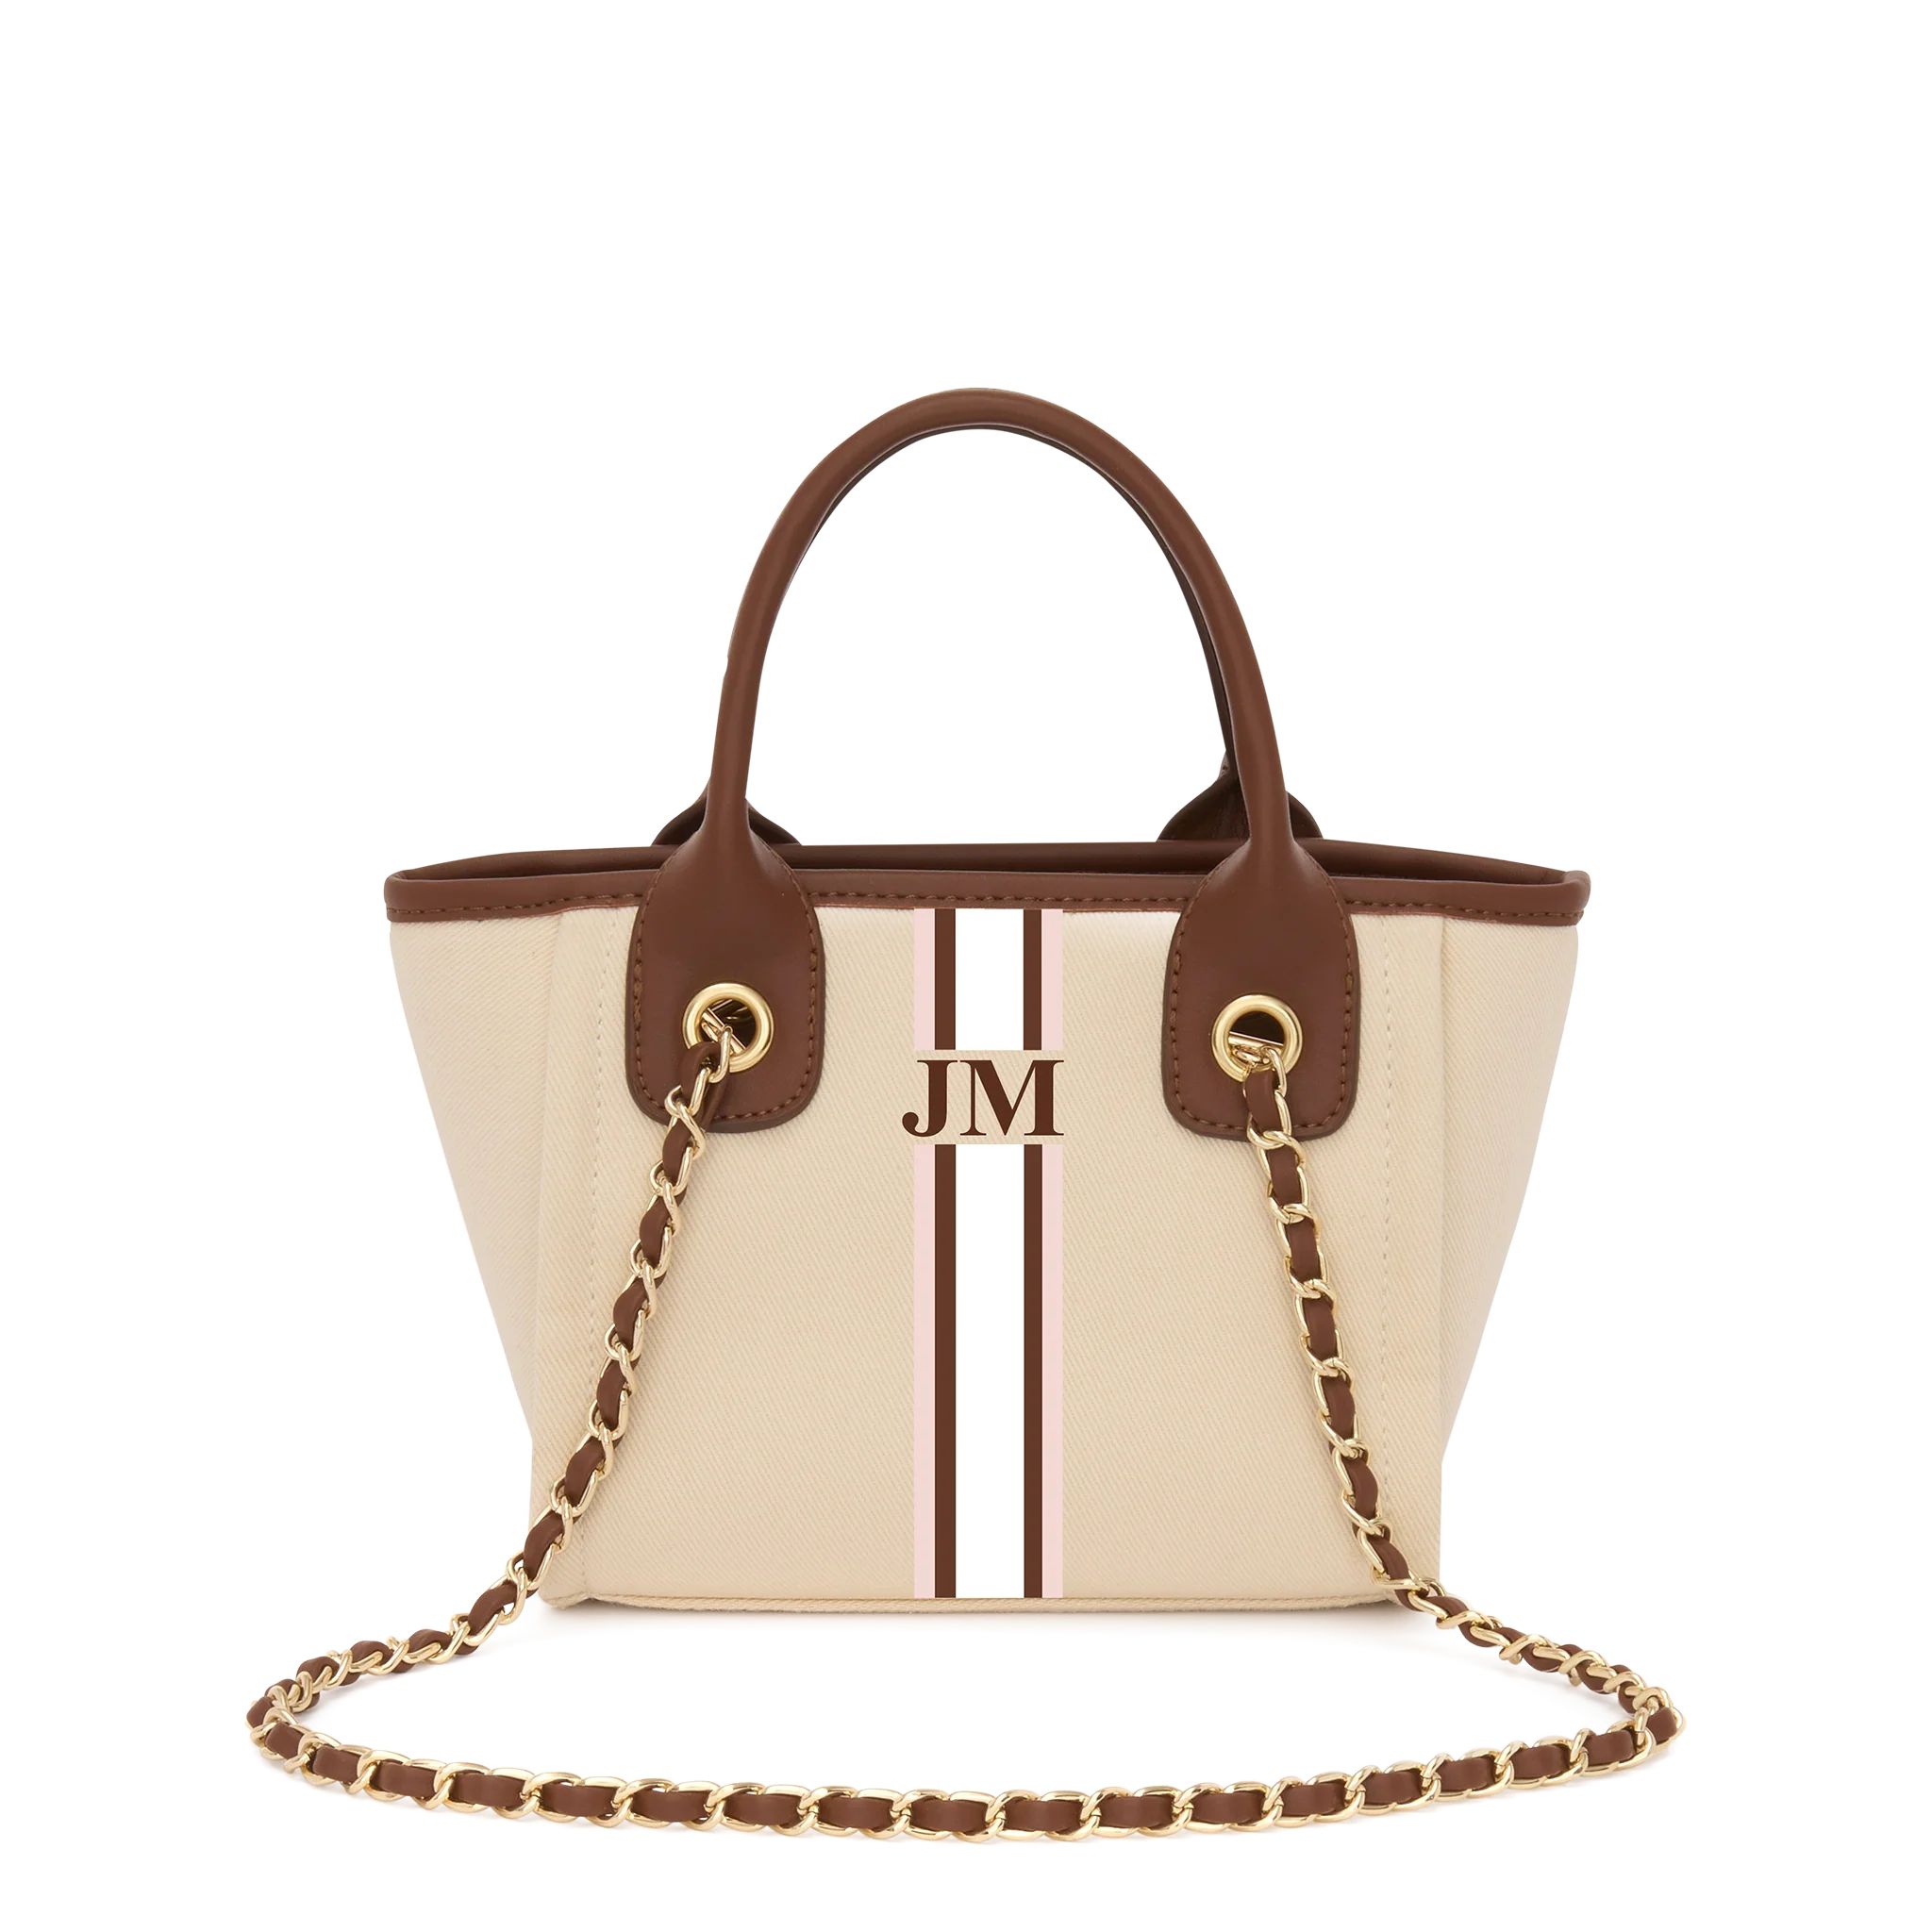 Lily & Bean Canvas Tote Bag Cream with Dark Brown Handles Mini | Lily and Bean